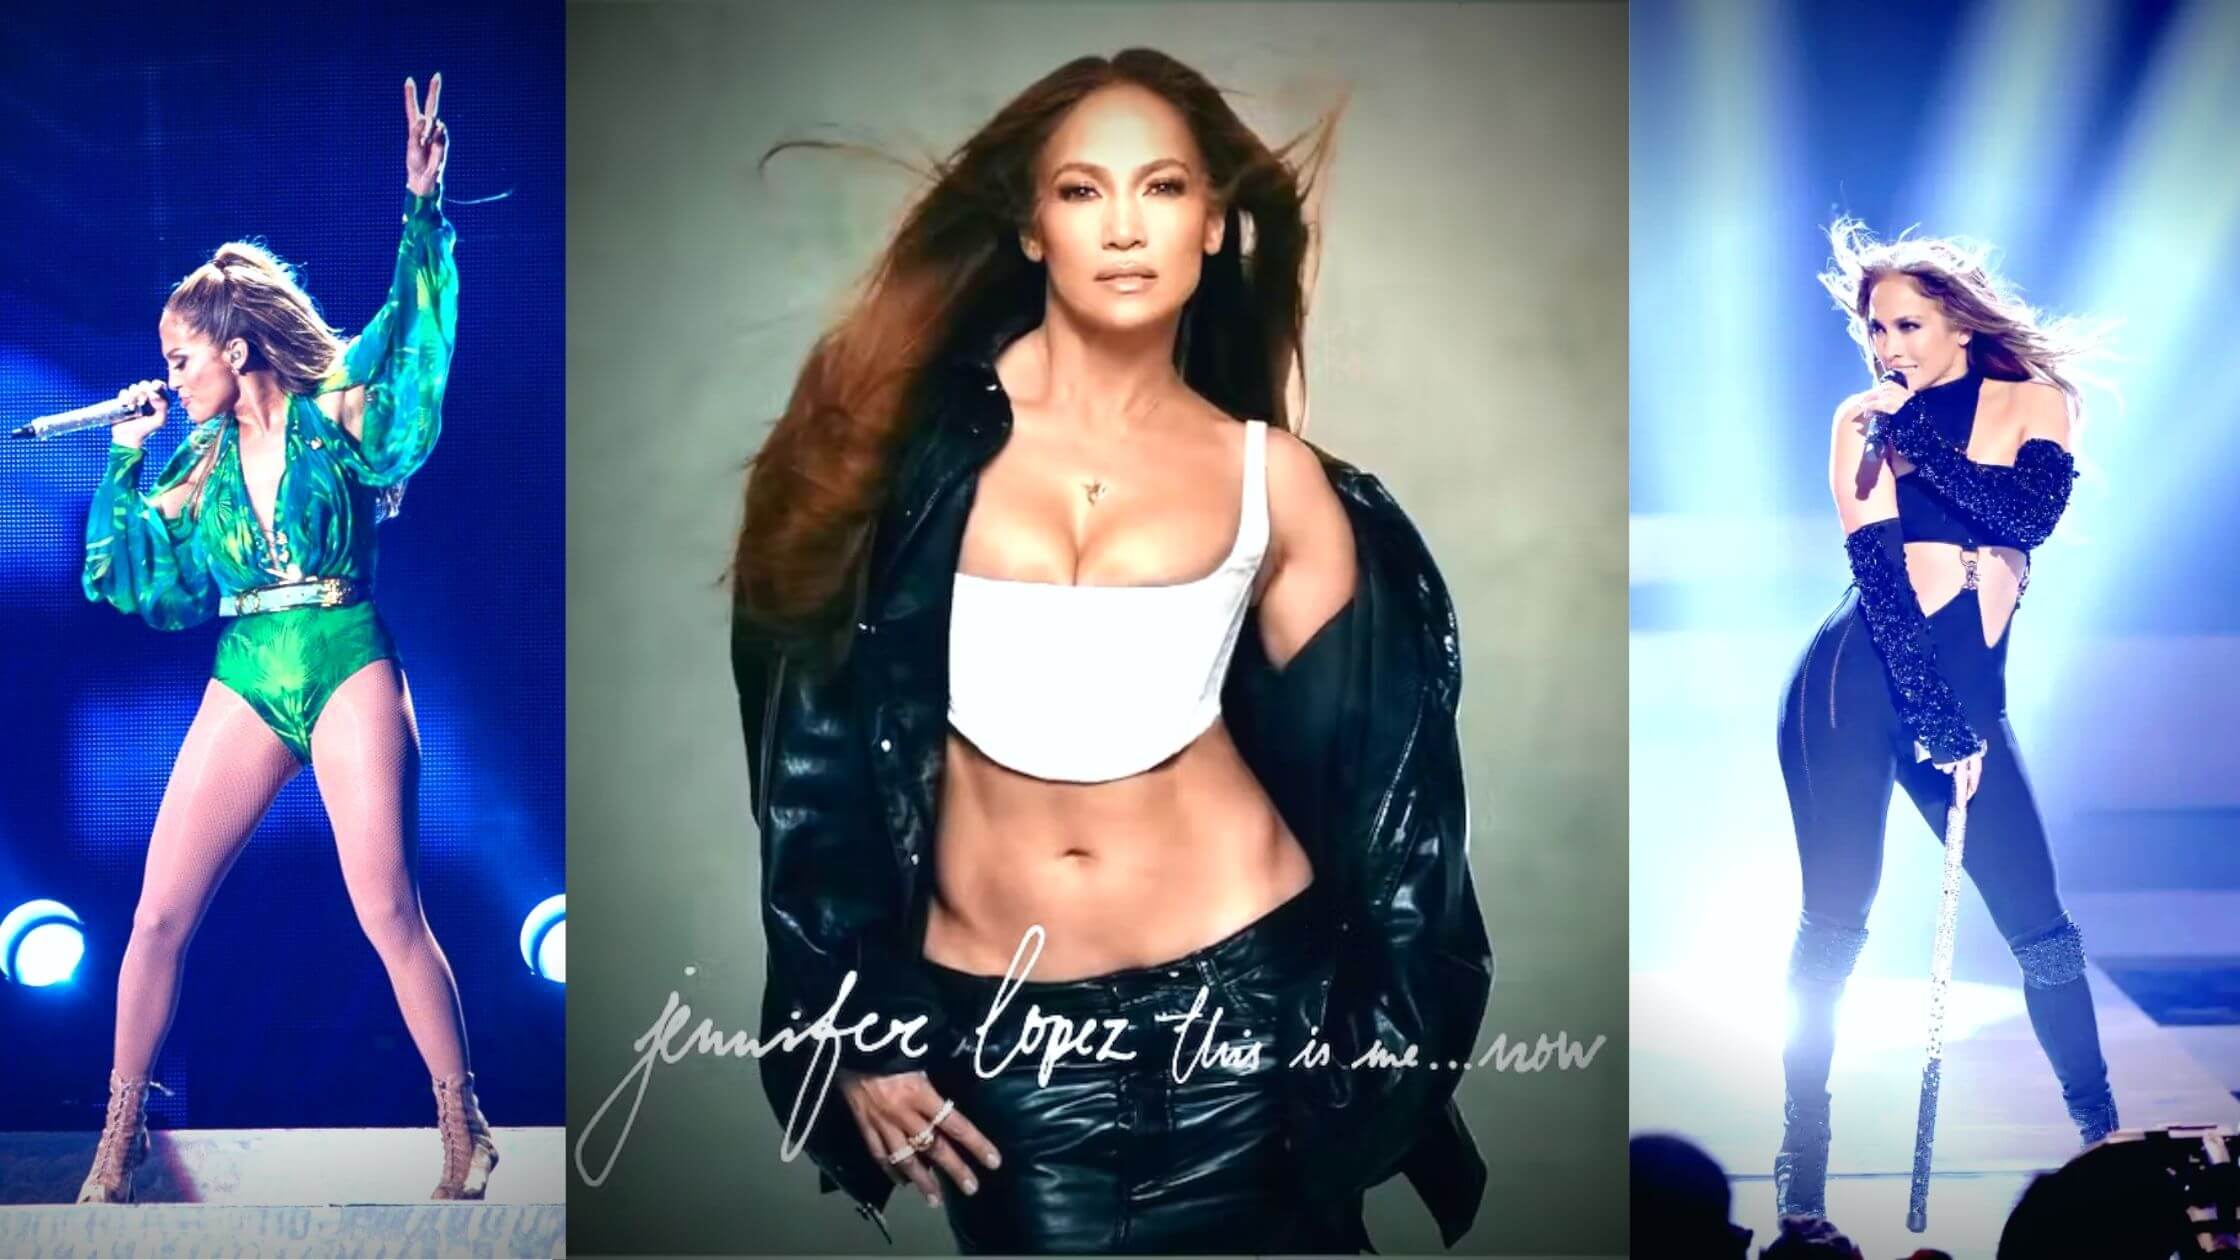 Announcing This Is Me…now Jennifer Lopez Returns To Social Media